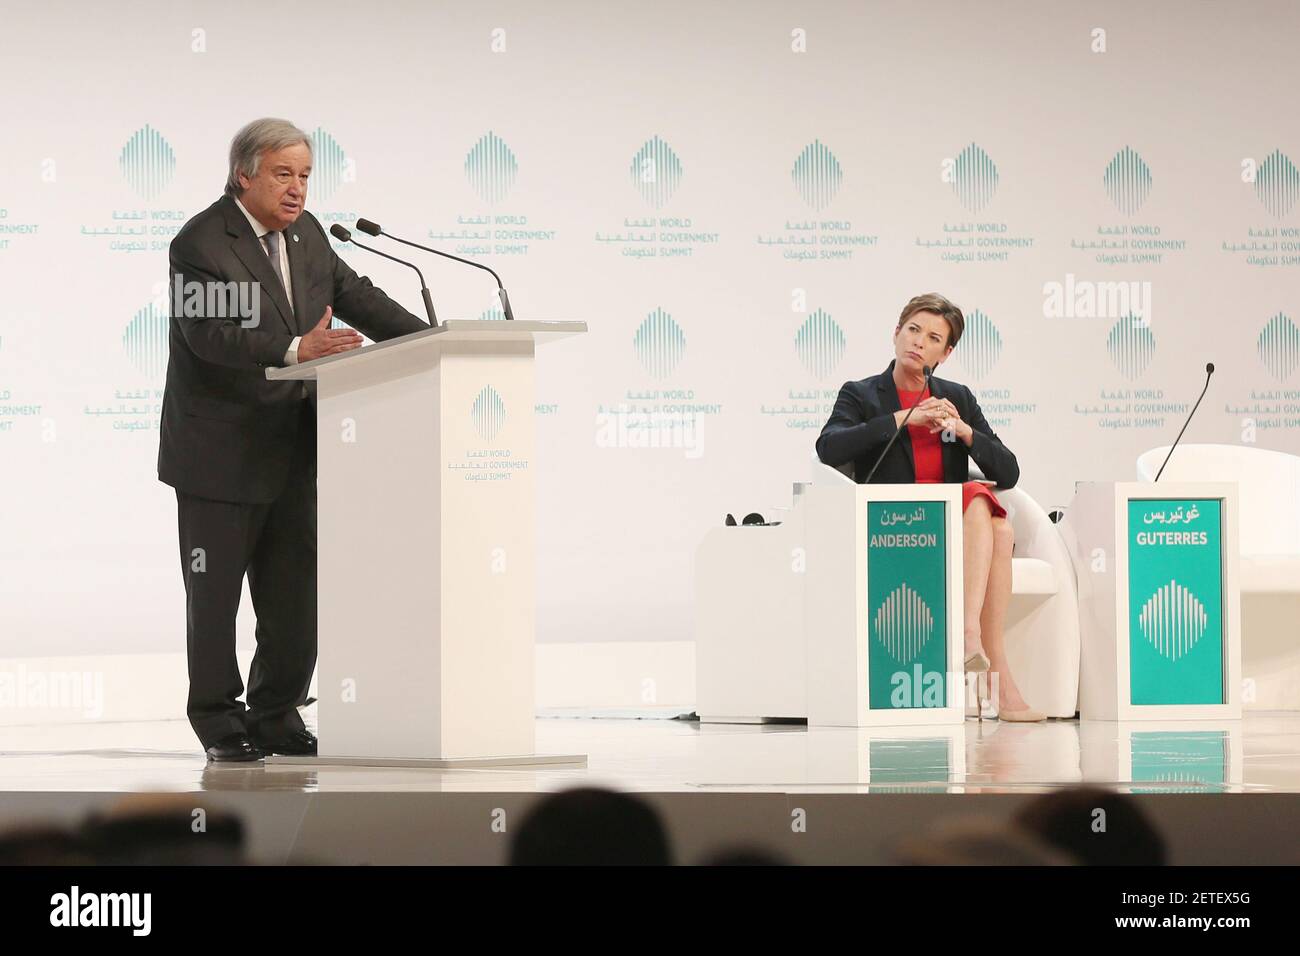 (170213) -- DUBAI, Feb. 13, 2017 (Xinhua) -- United Nations Secretary General Antonio Guterres (L) speaks during the 5th World Government Summit in Dubai, United Arab Emirates, Feb. 13, 2017. Guterres said here on Monday that he was disappointed that the U.S. opposed his appointment of former Palestinian Prime Minister Salam Fayyad as UN envoy to mediate in the conflict in Libya. (Xinhua/Li Zhen) (hy) (Photo by Xinhua/Sipa USA) Stock Photo